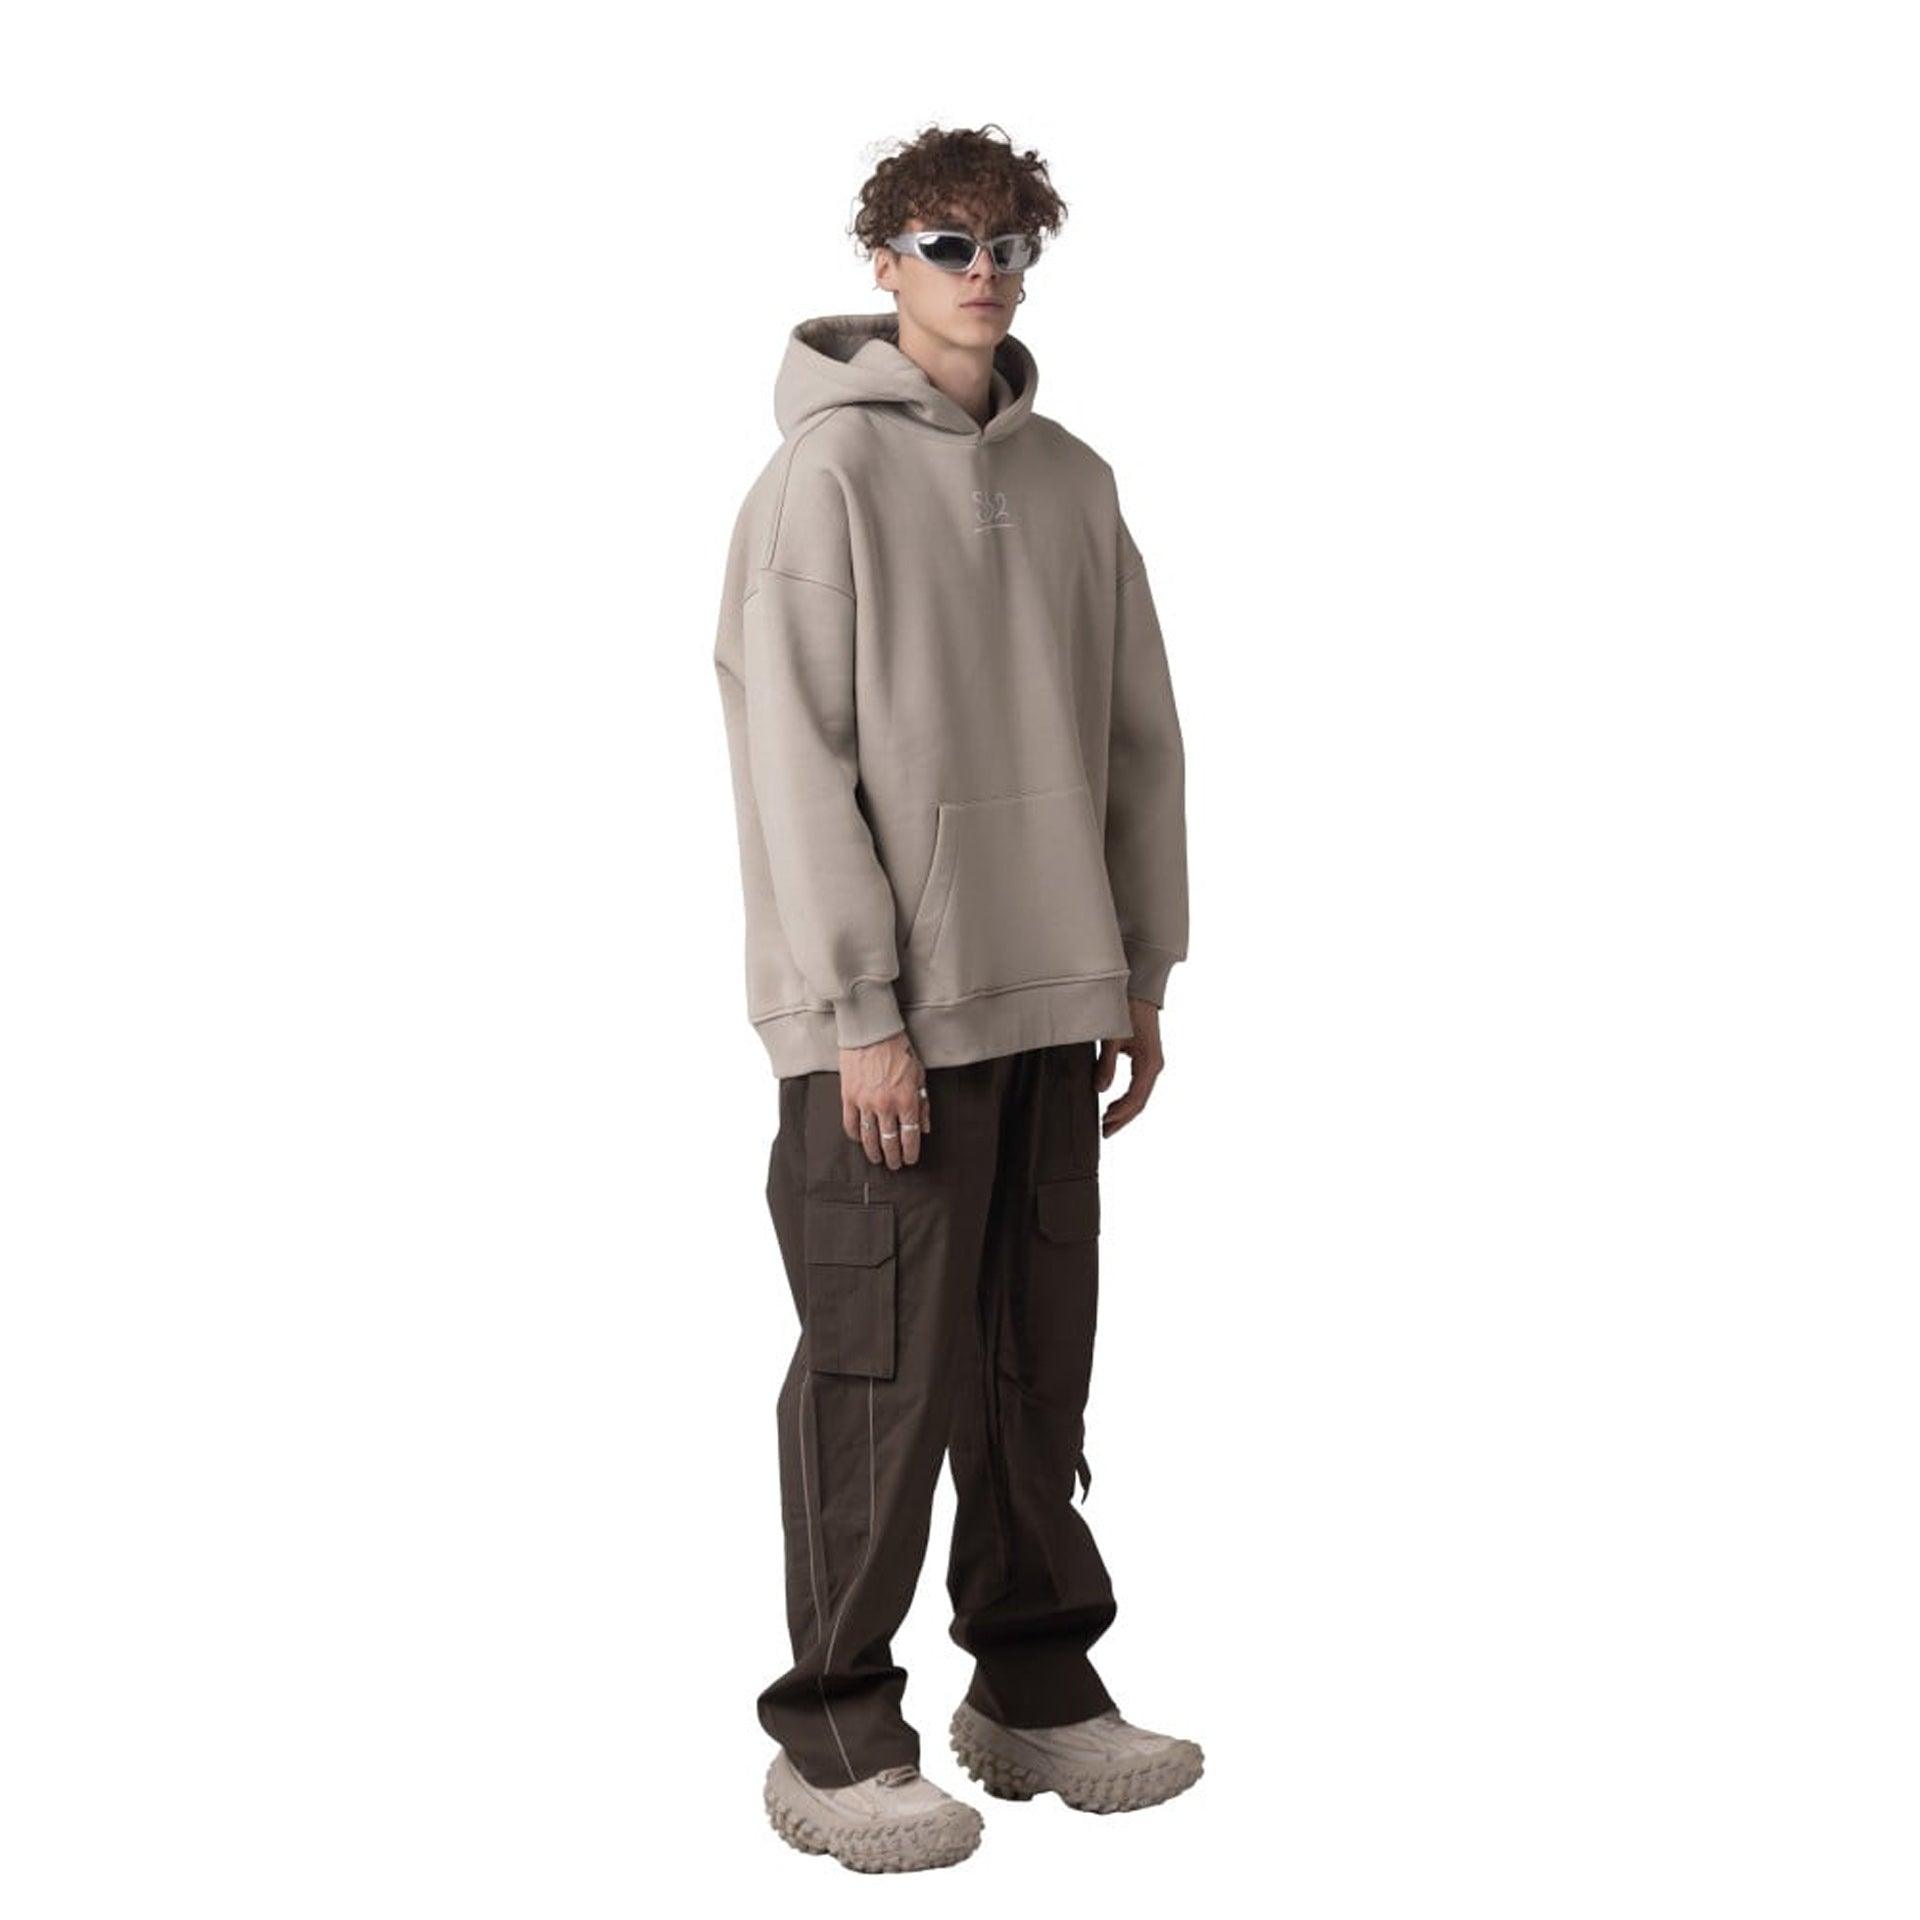 Beige Pullover Hoodie From S32 - WECRE8